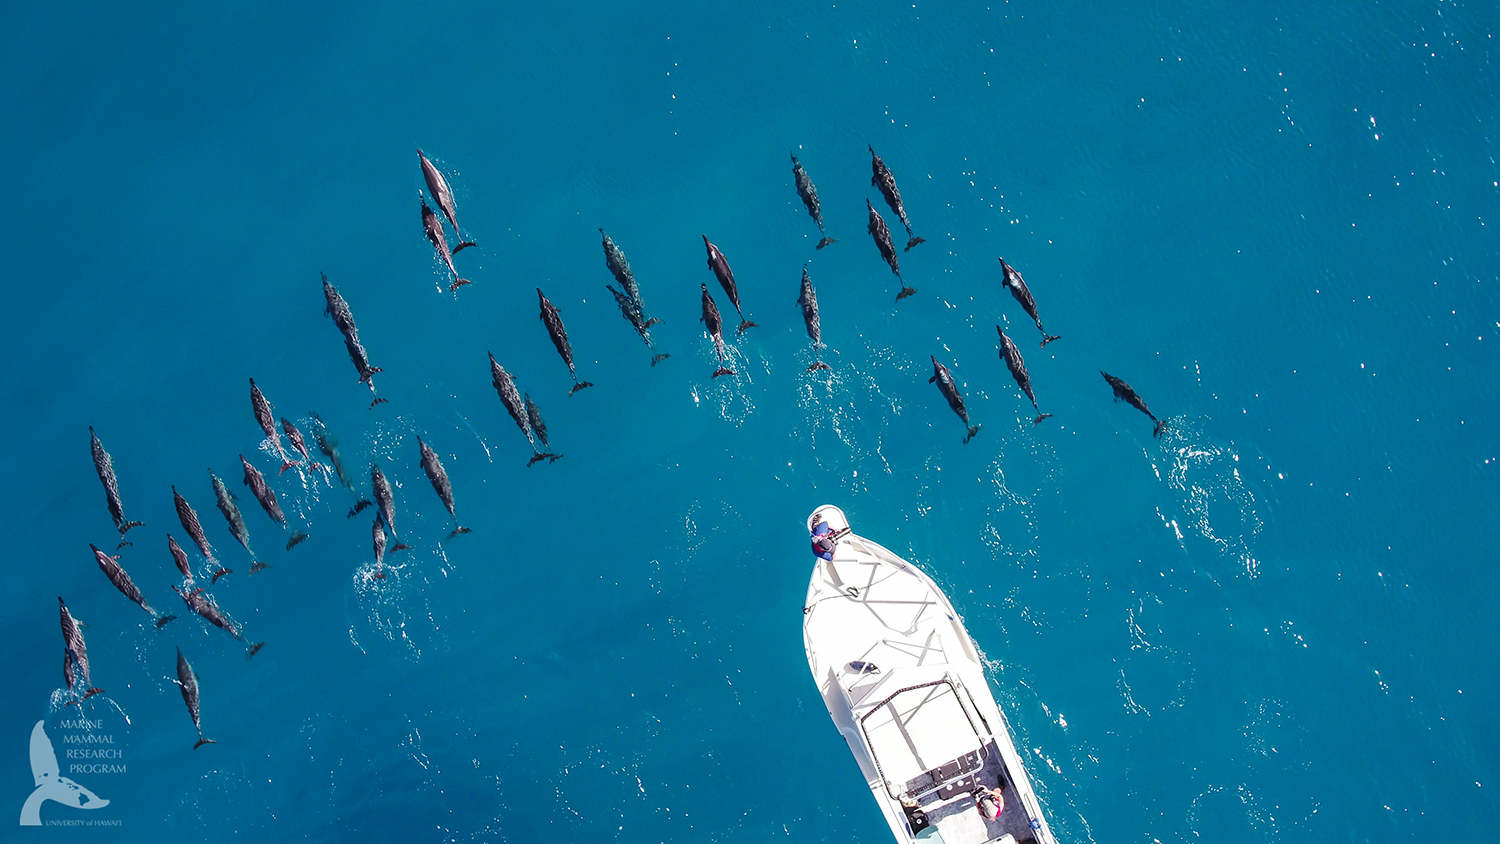 cPherson took this drone photo while conducting her dolphin project on the west coast of O’ahu. Her research assistant captures photos from the bow. (photo by Liah McPherson and taken under NMFS permit 21476)